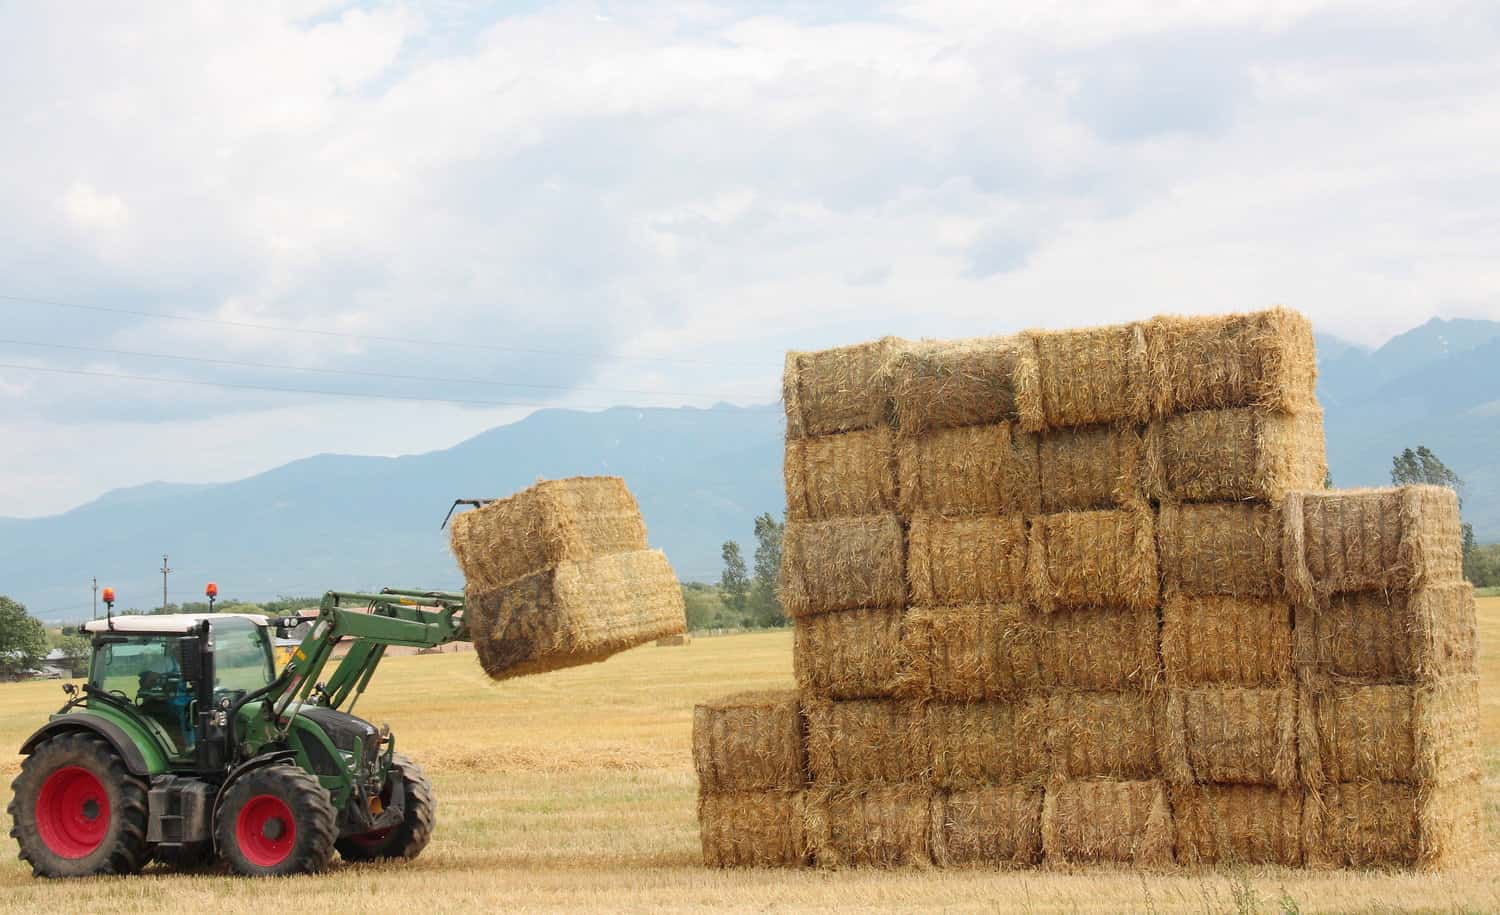 Transporting and Storing the Hay